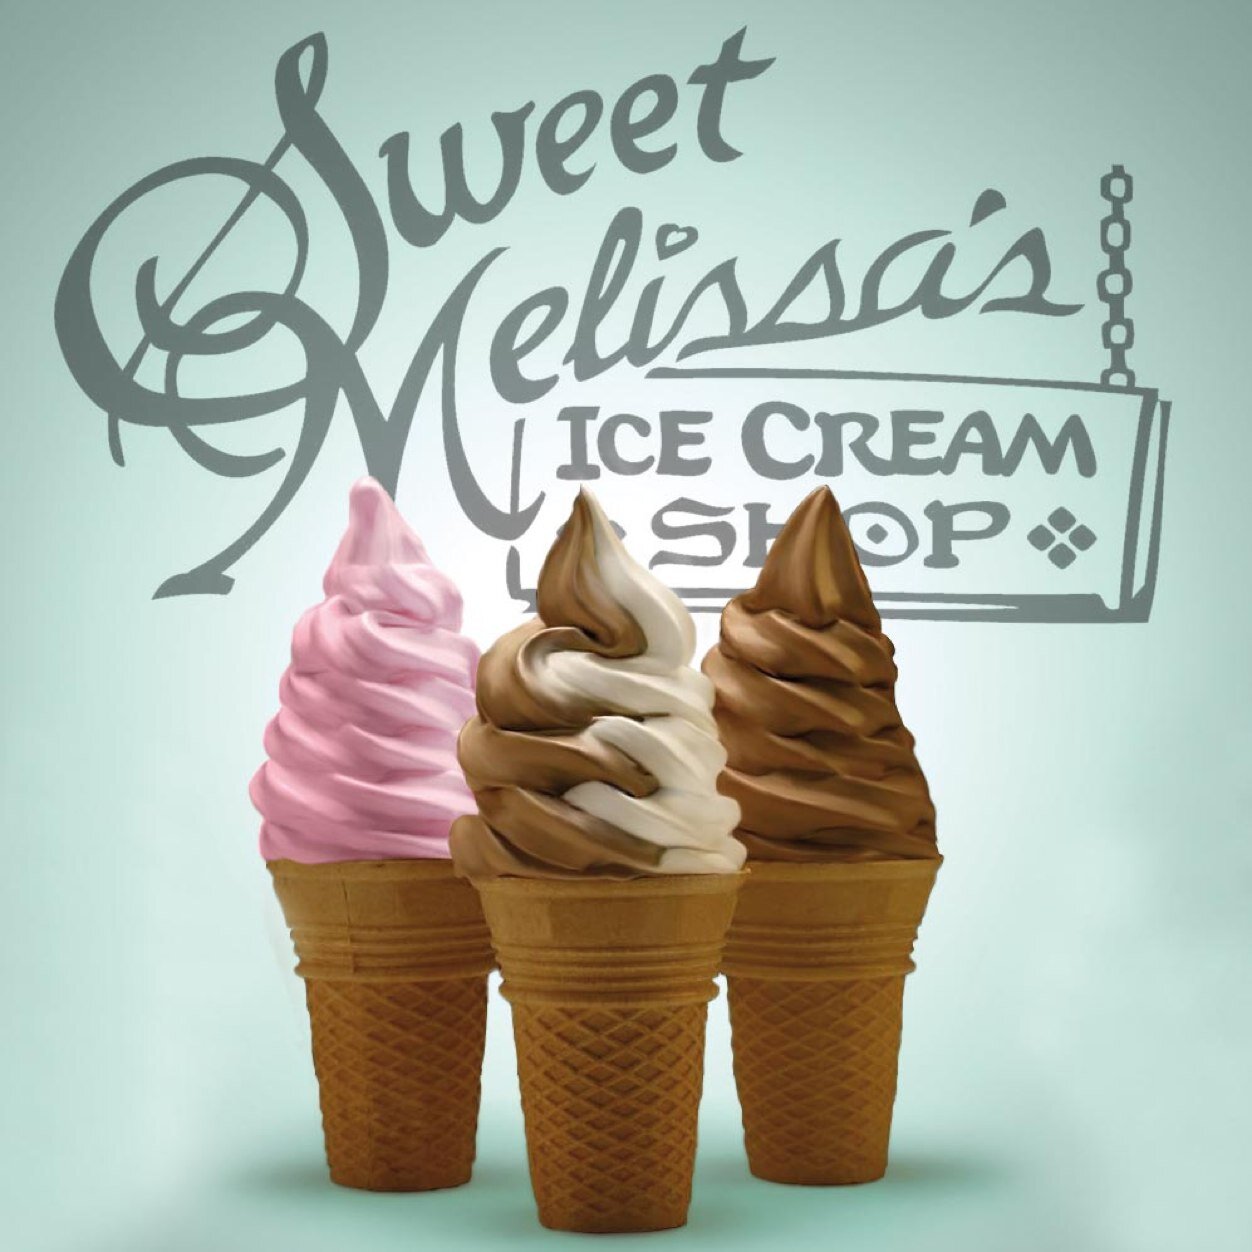 Best Soft Serve this side of the Mississippi! 🍦🍦Open seasonally from April- September.